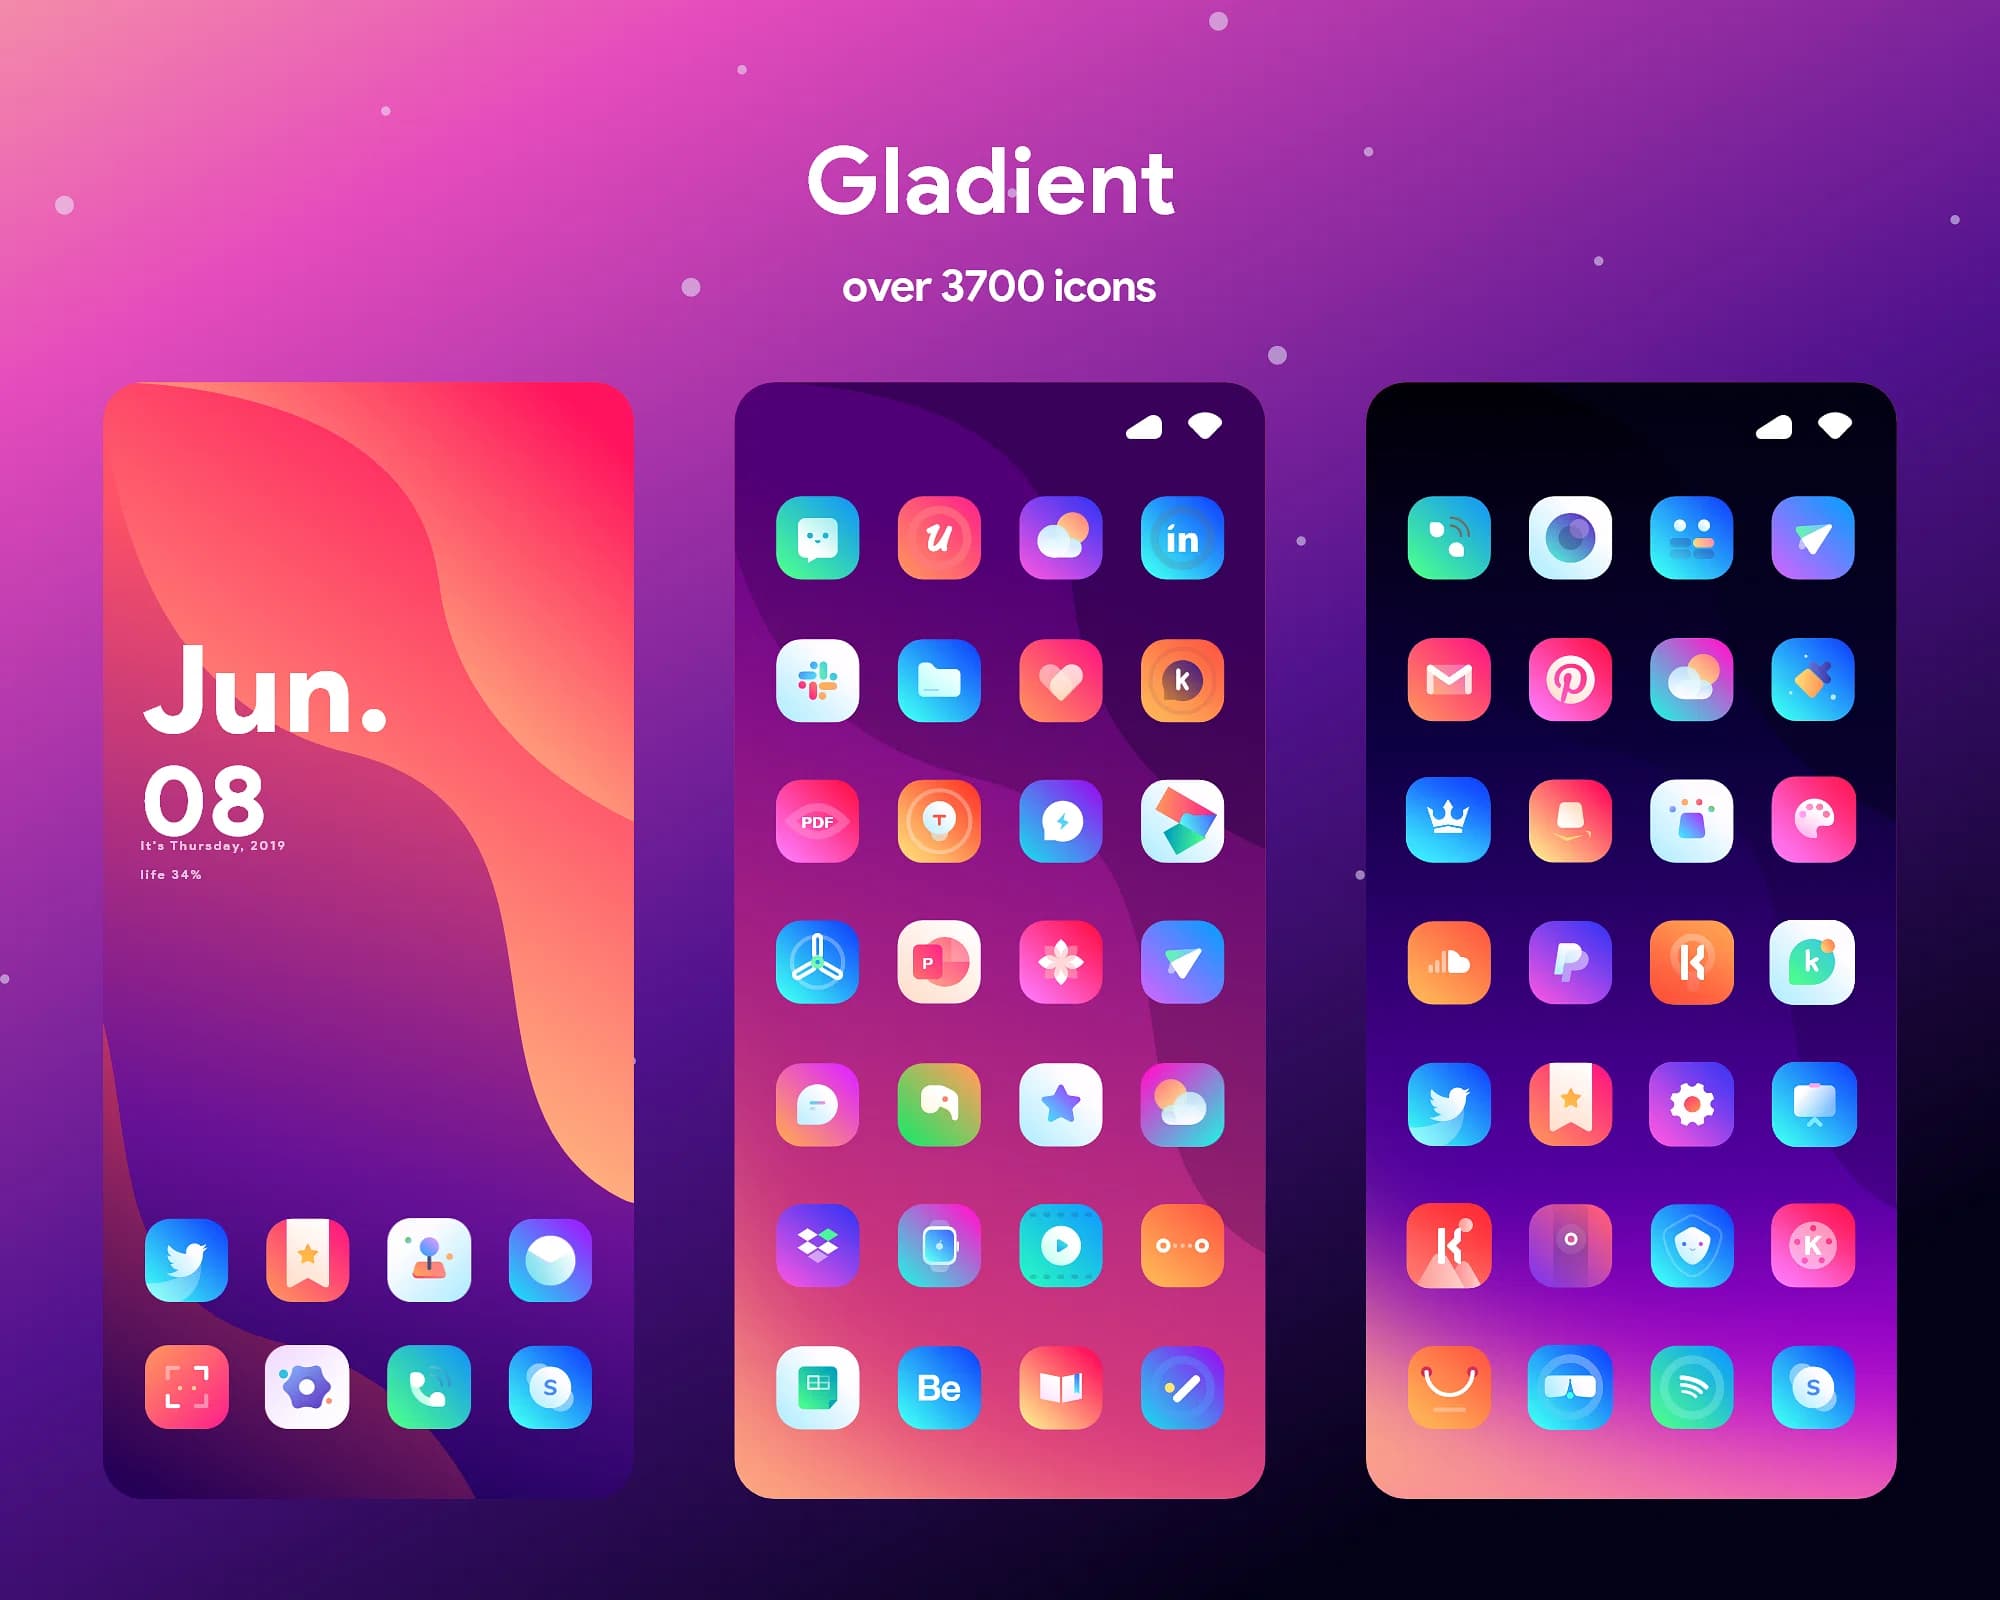 Gladient is an exquisite gradient-based theme for iPhones with tons of extras